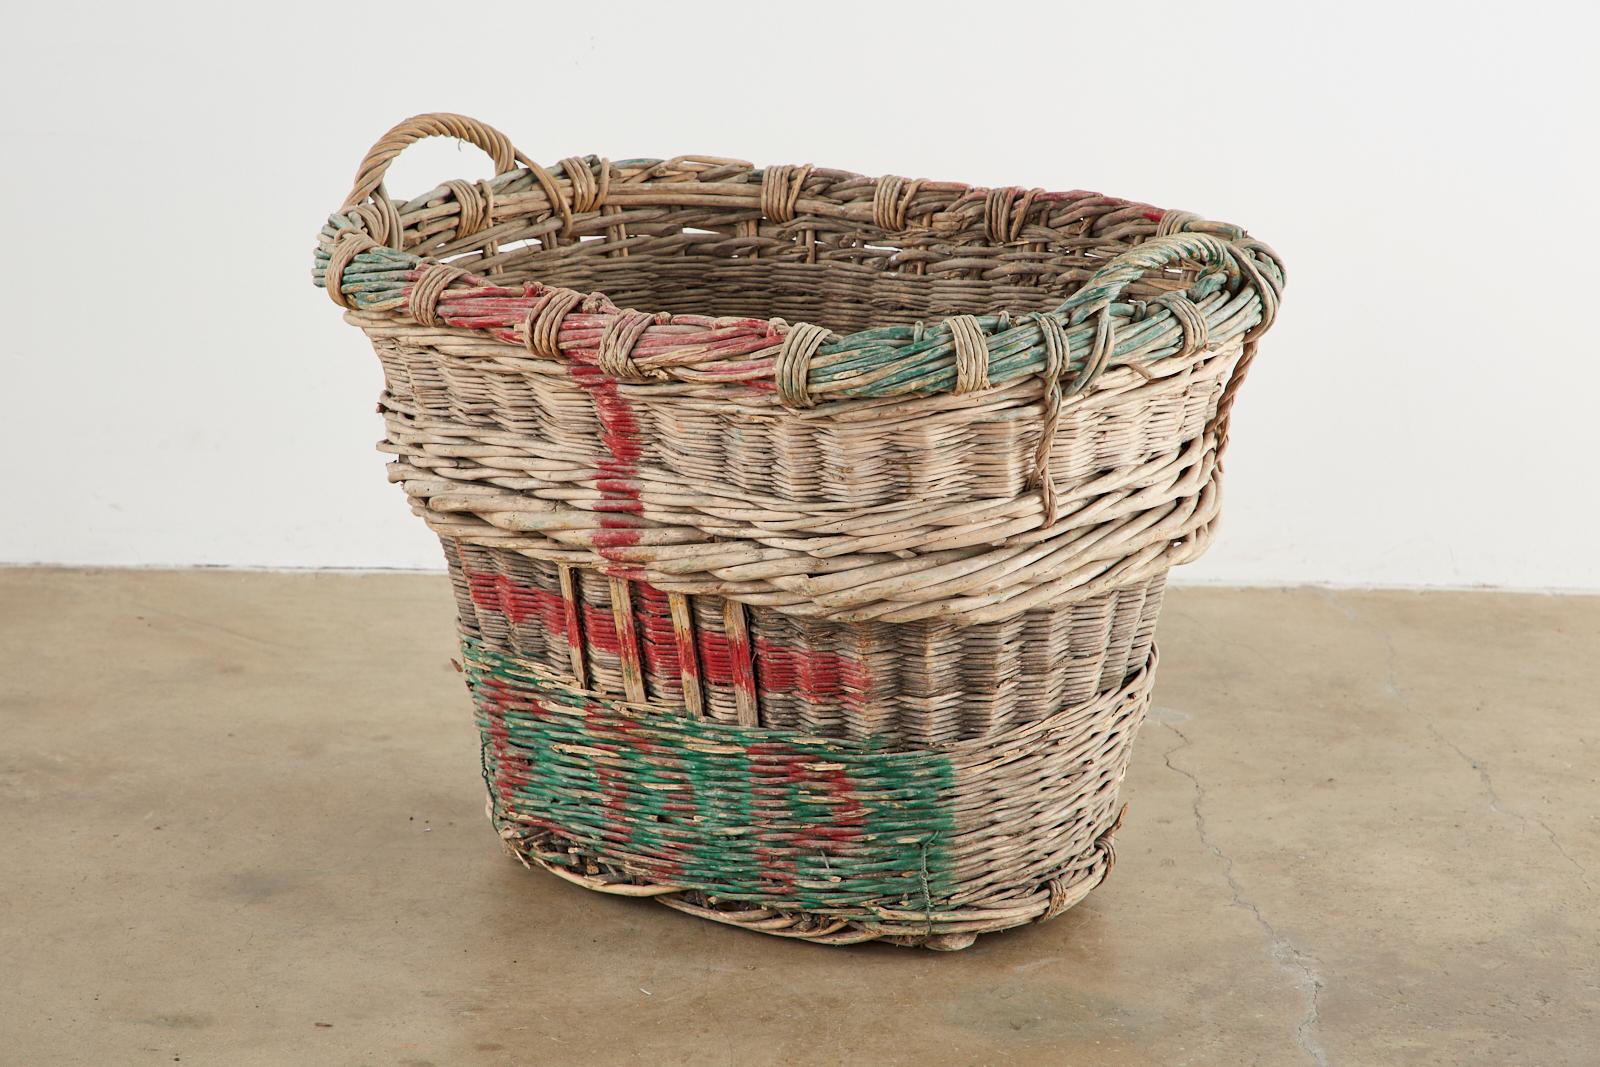 Rustic French chateau champagne grape harvesting basket constructed from woven wicker reeds. Features a thick braided top with handles on each end and brightly colored champagne house initials on the sides reading E.D.P in vivid red and green paint.